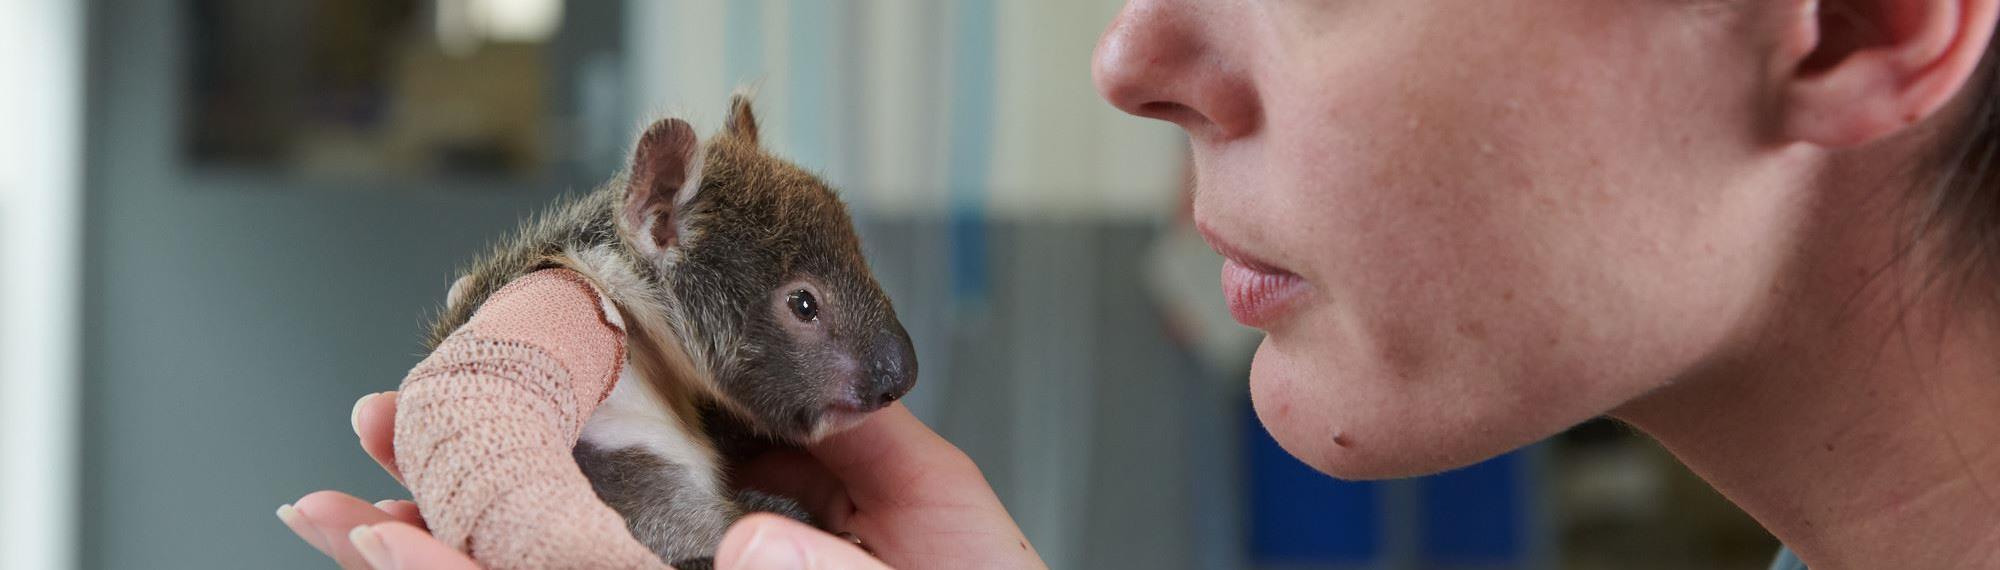 Small rescued baby koala orphan with plaster on its tiny broken arm. A vet holds it gently while doing a health check.